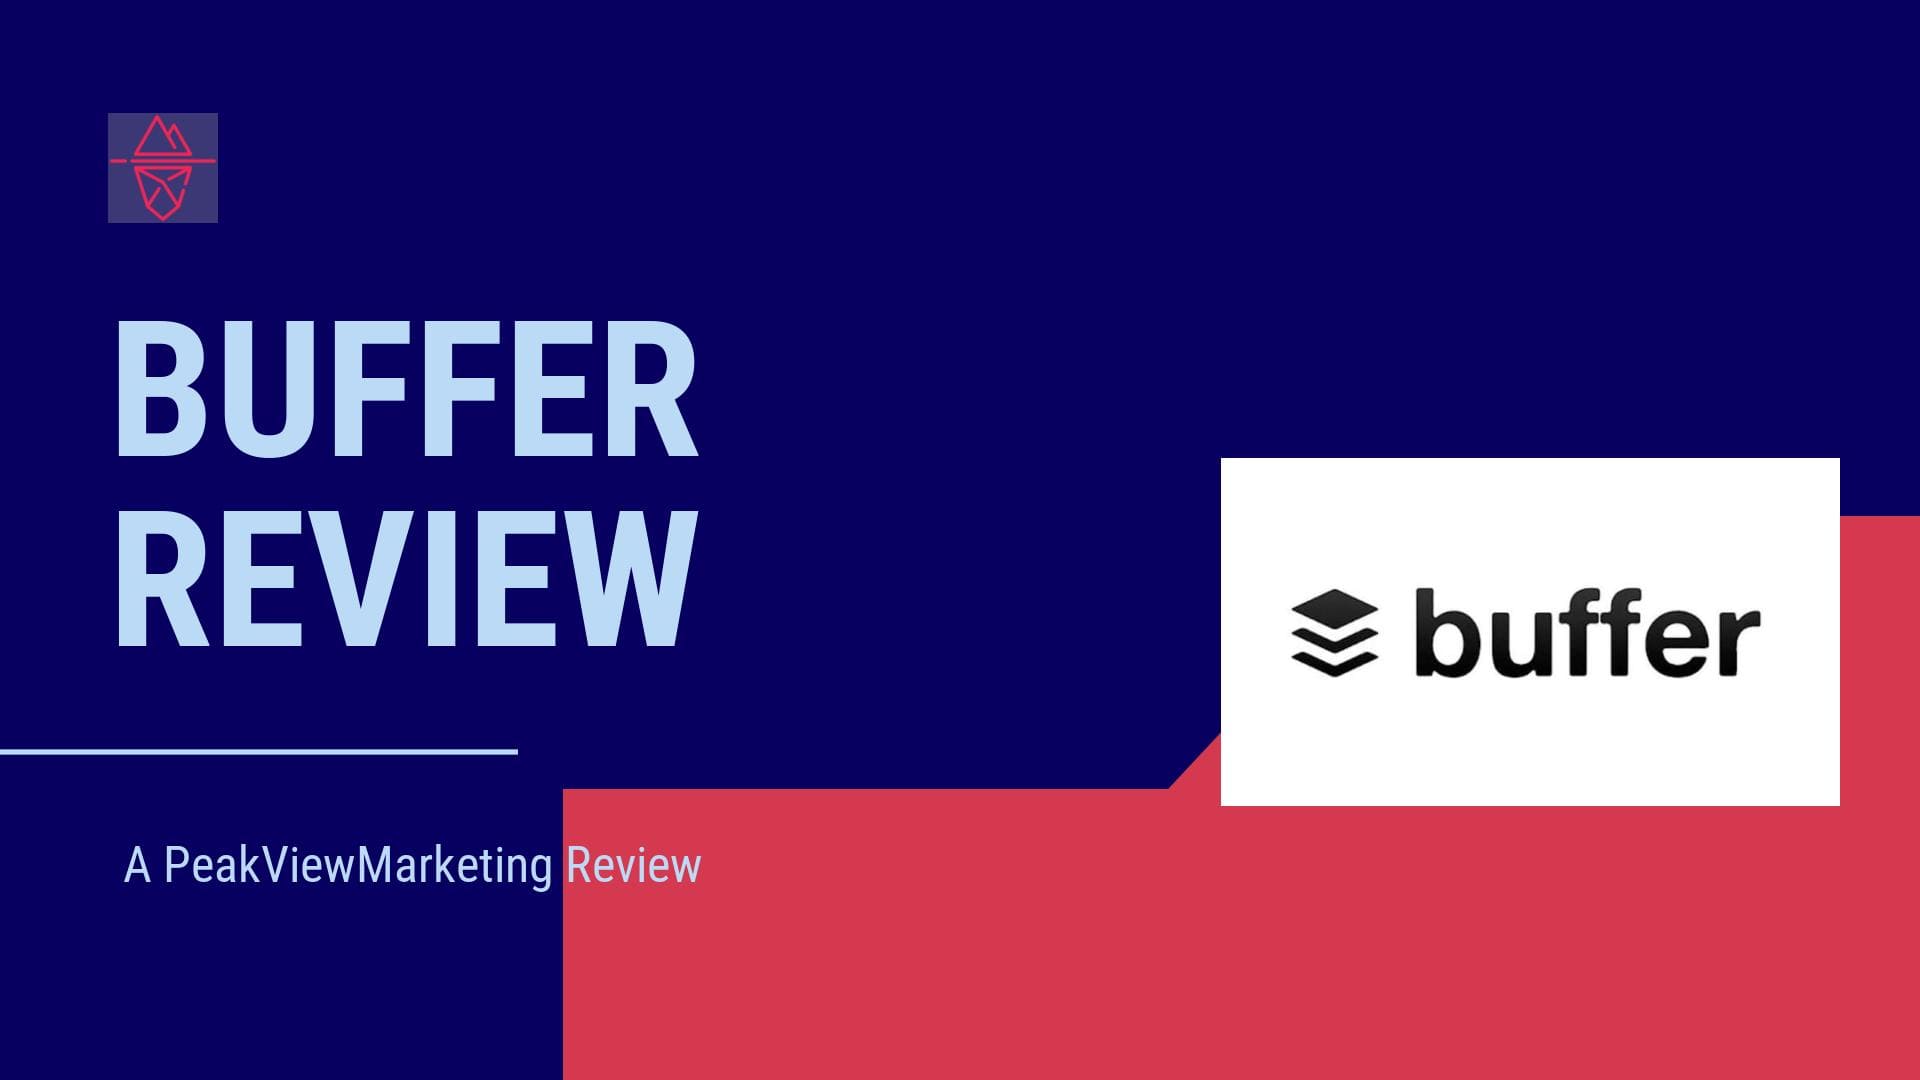 Buffer Review Image